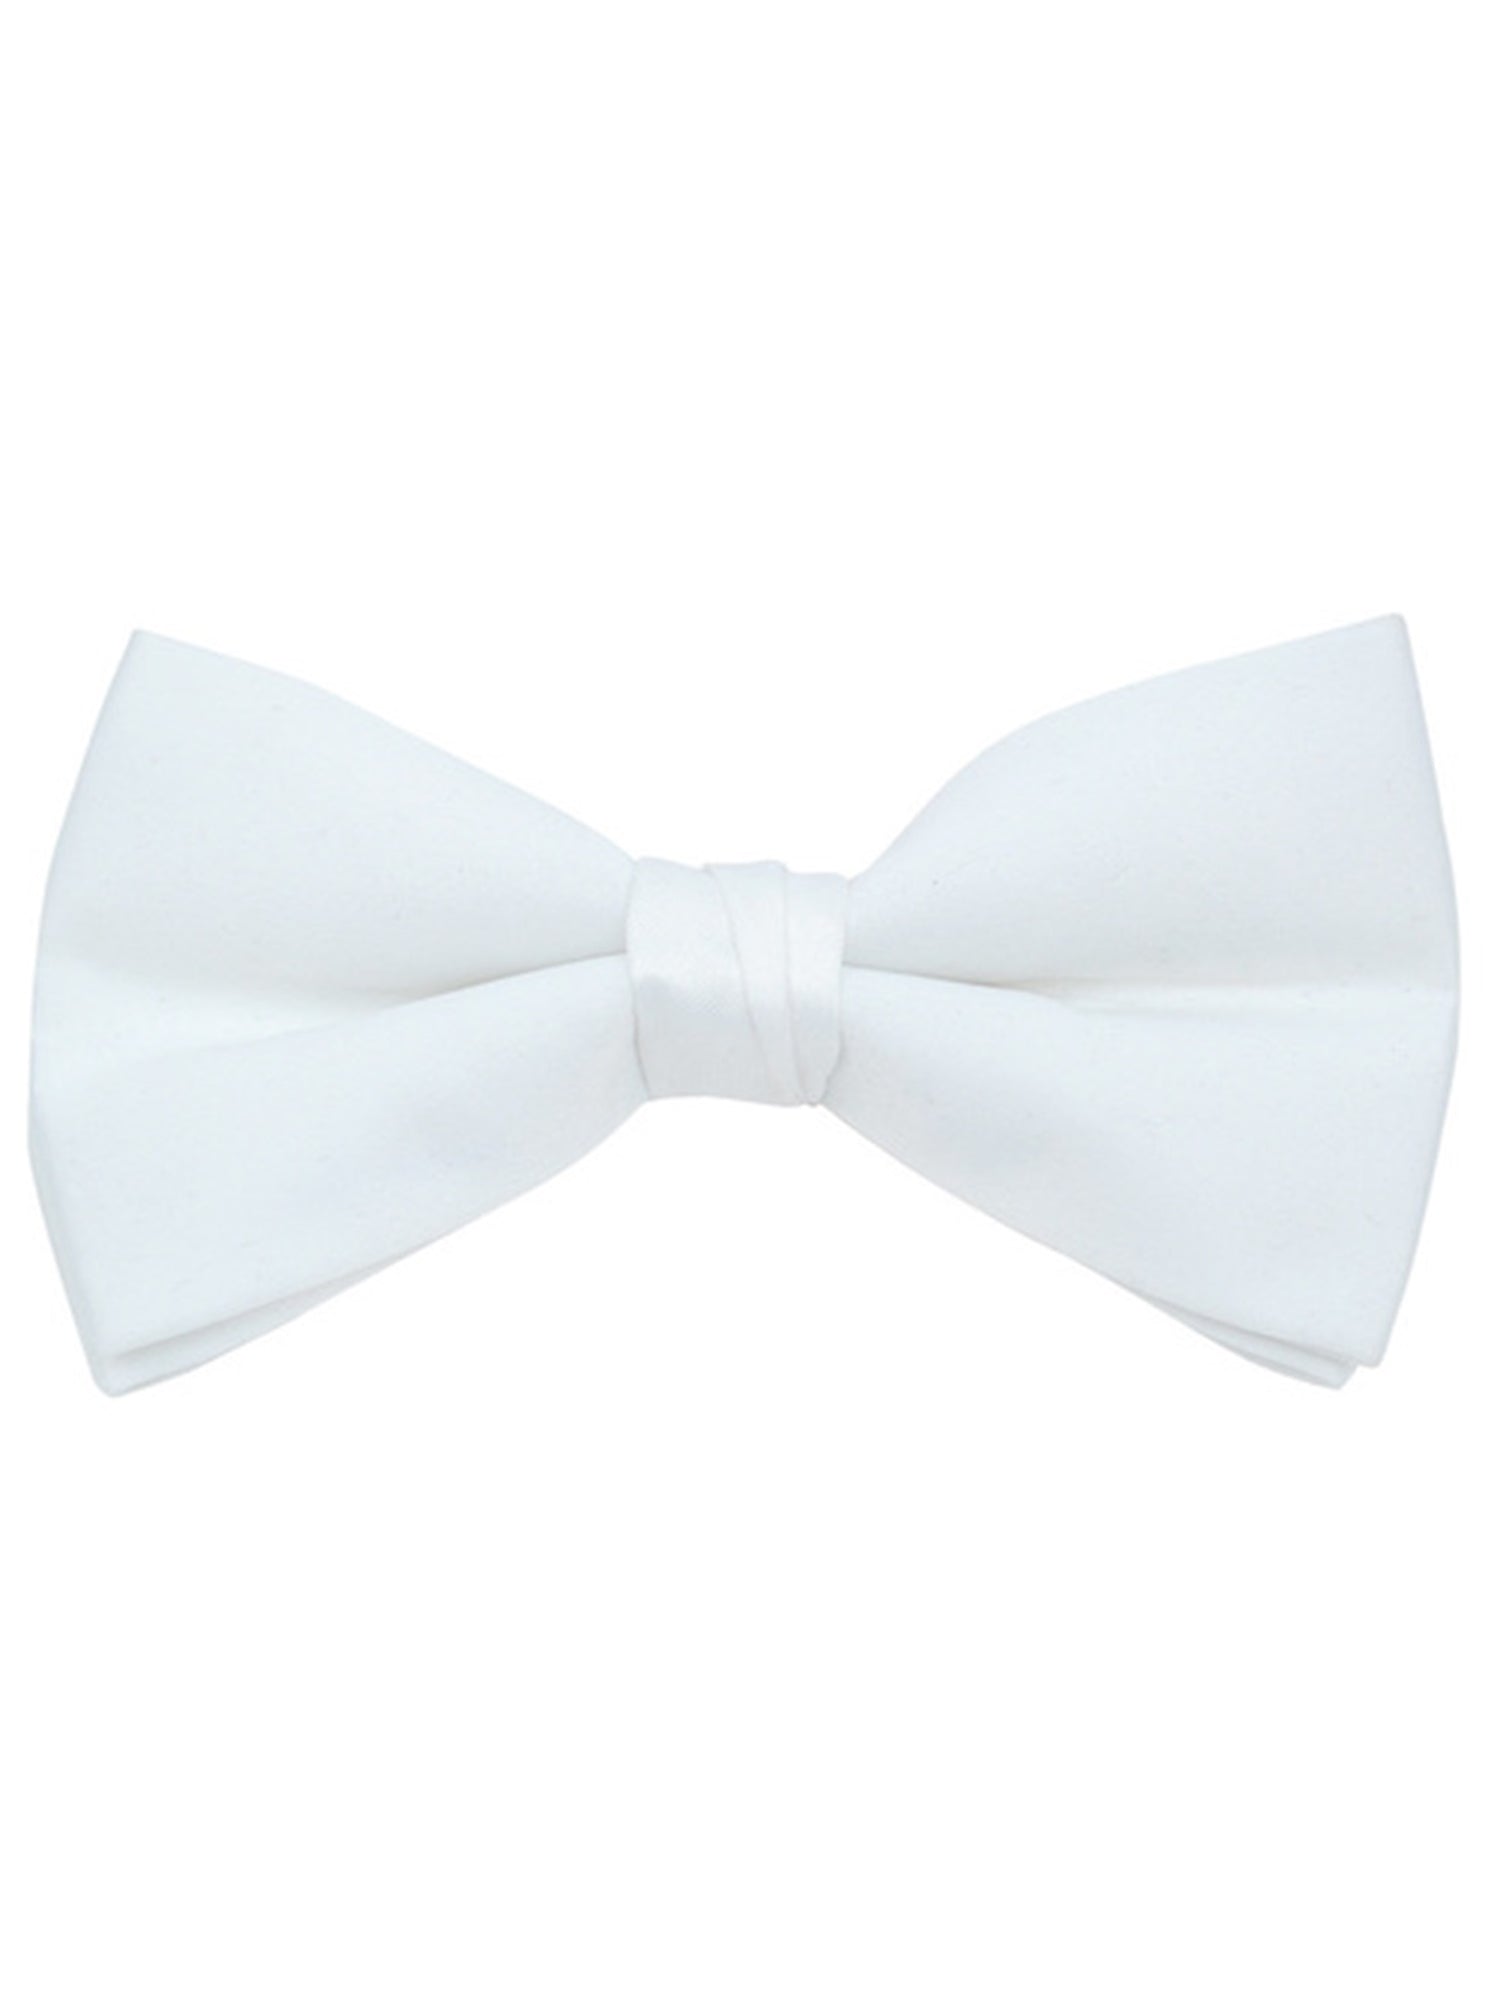 Young Boy's Pre-tied Adjustable Length Bow Tie - Formal Tuxedo Solid Color Boy's Solid Color Bow Tie TheDapperTie White One Size 